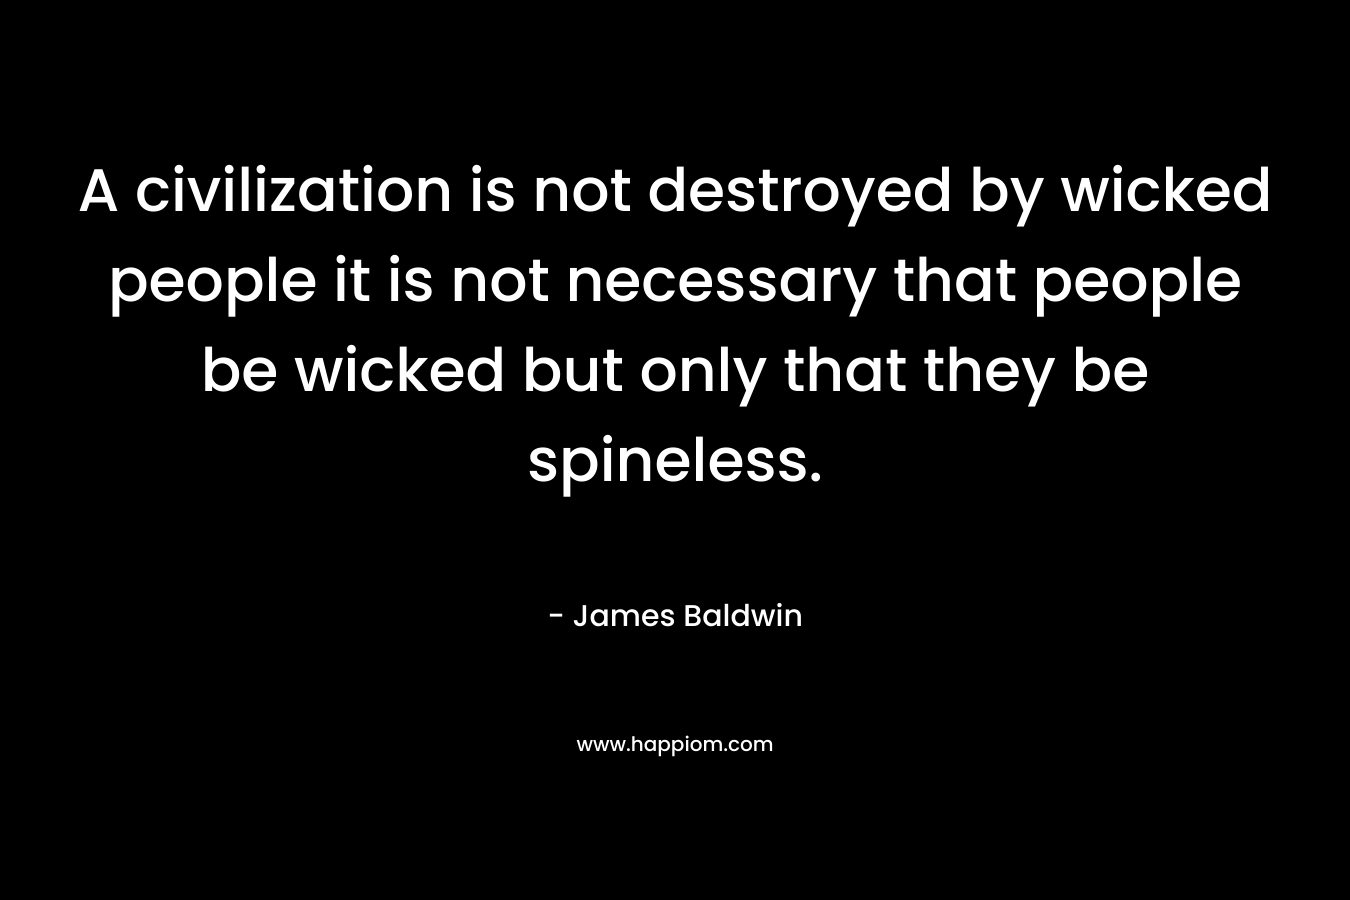 A civilization is not destroyed by wicked people it is not necessary that people be wicked but only that they be spineless. 